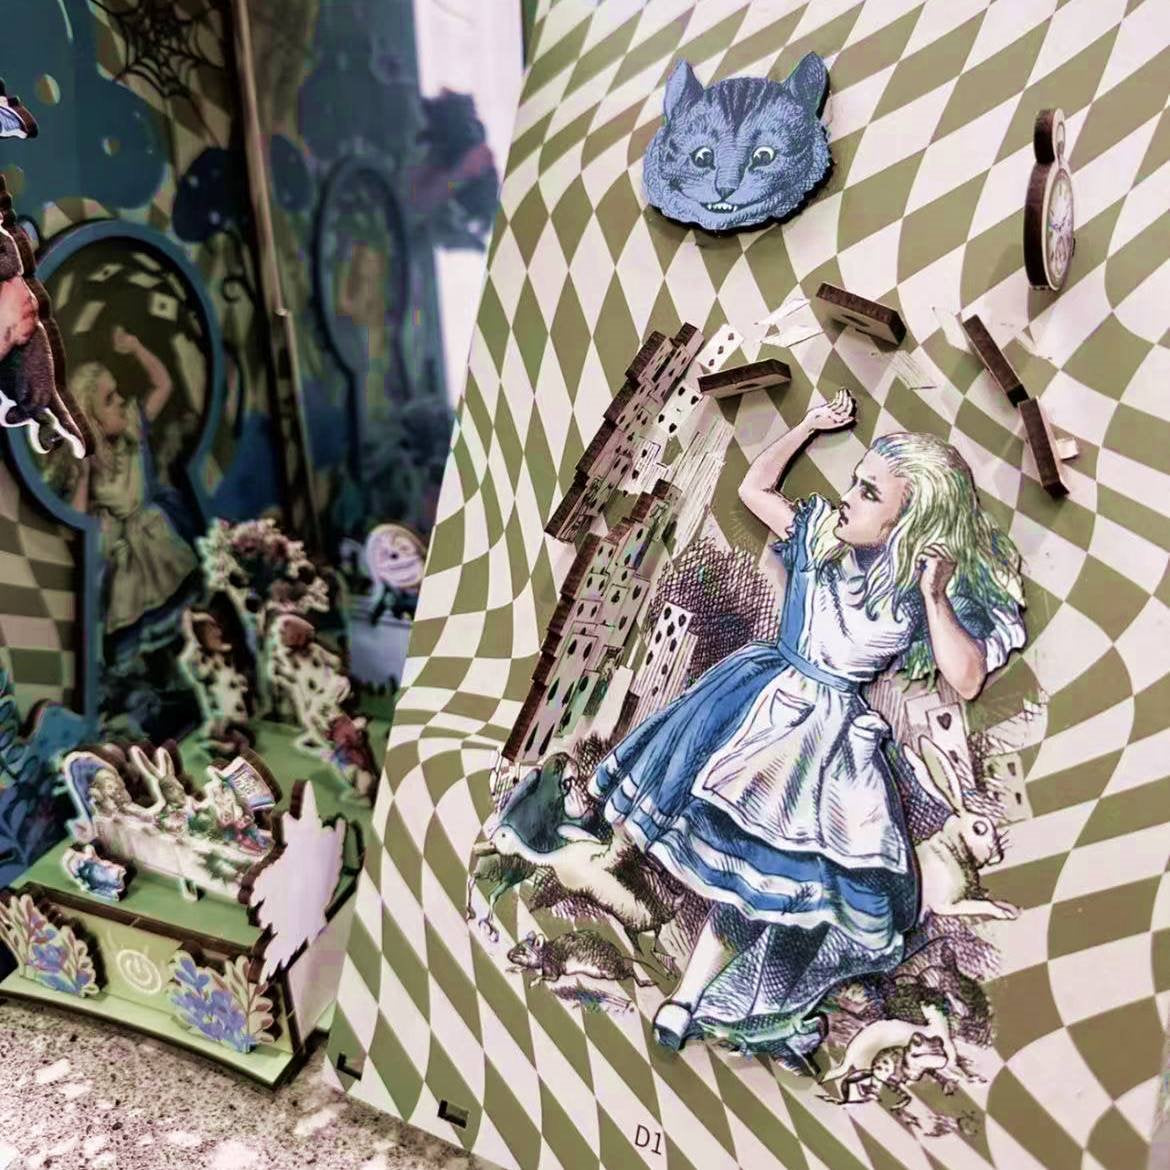 Alice in wonderland DIY Wooden Book Nook Kit, A charming miniature 3d wooden puzzles, perfect for crafting enthusiasts, dollhouse collectors and fairyland lovers alike. Ideal for bookshelf decor of gifting.